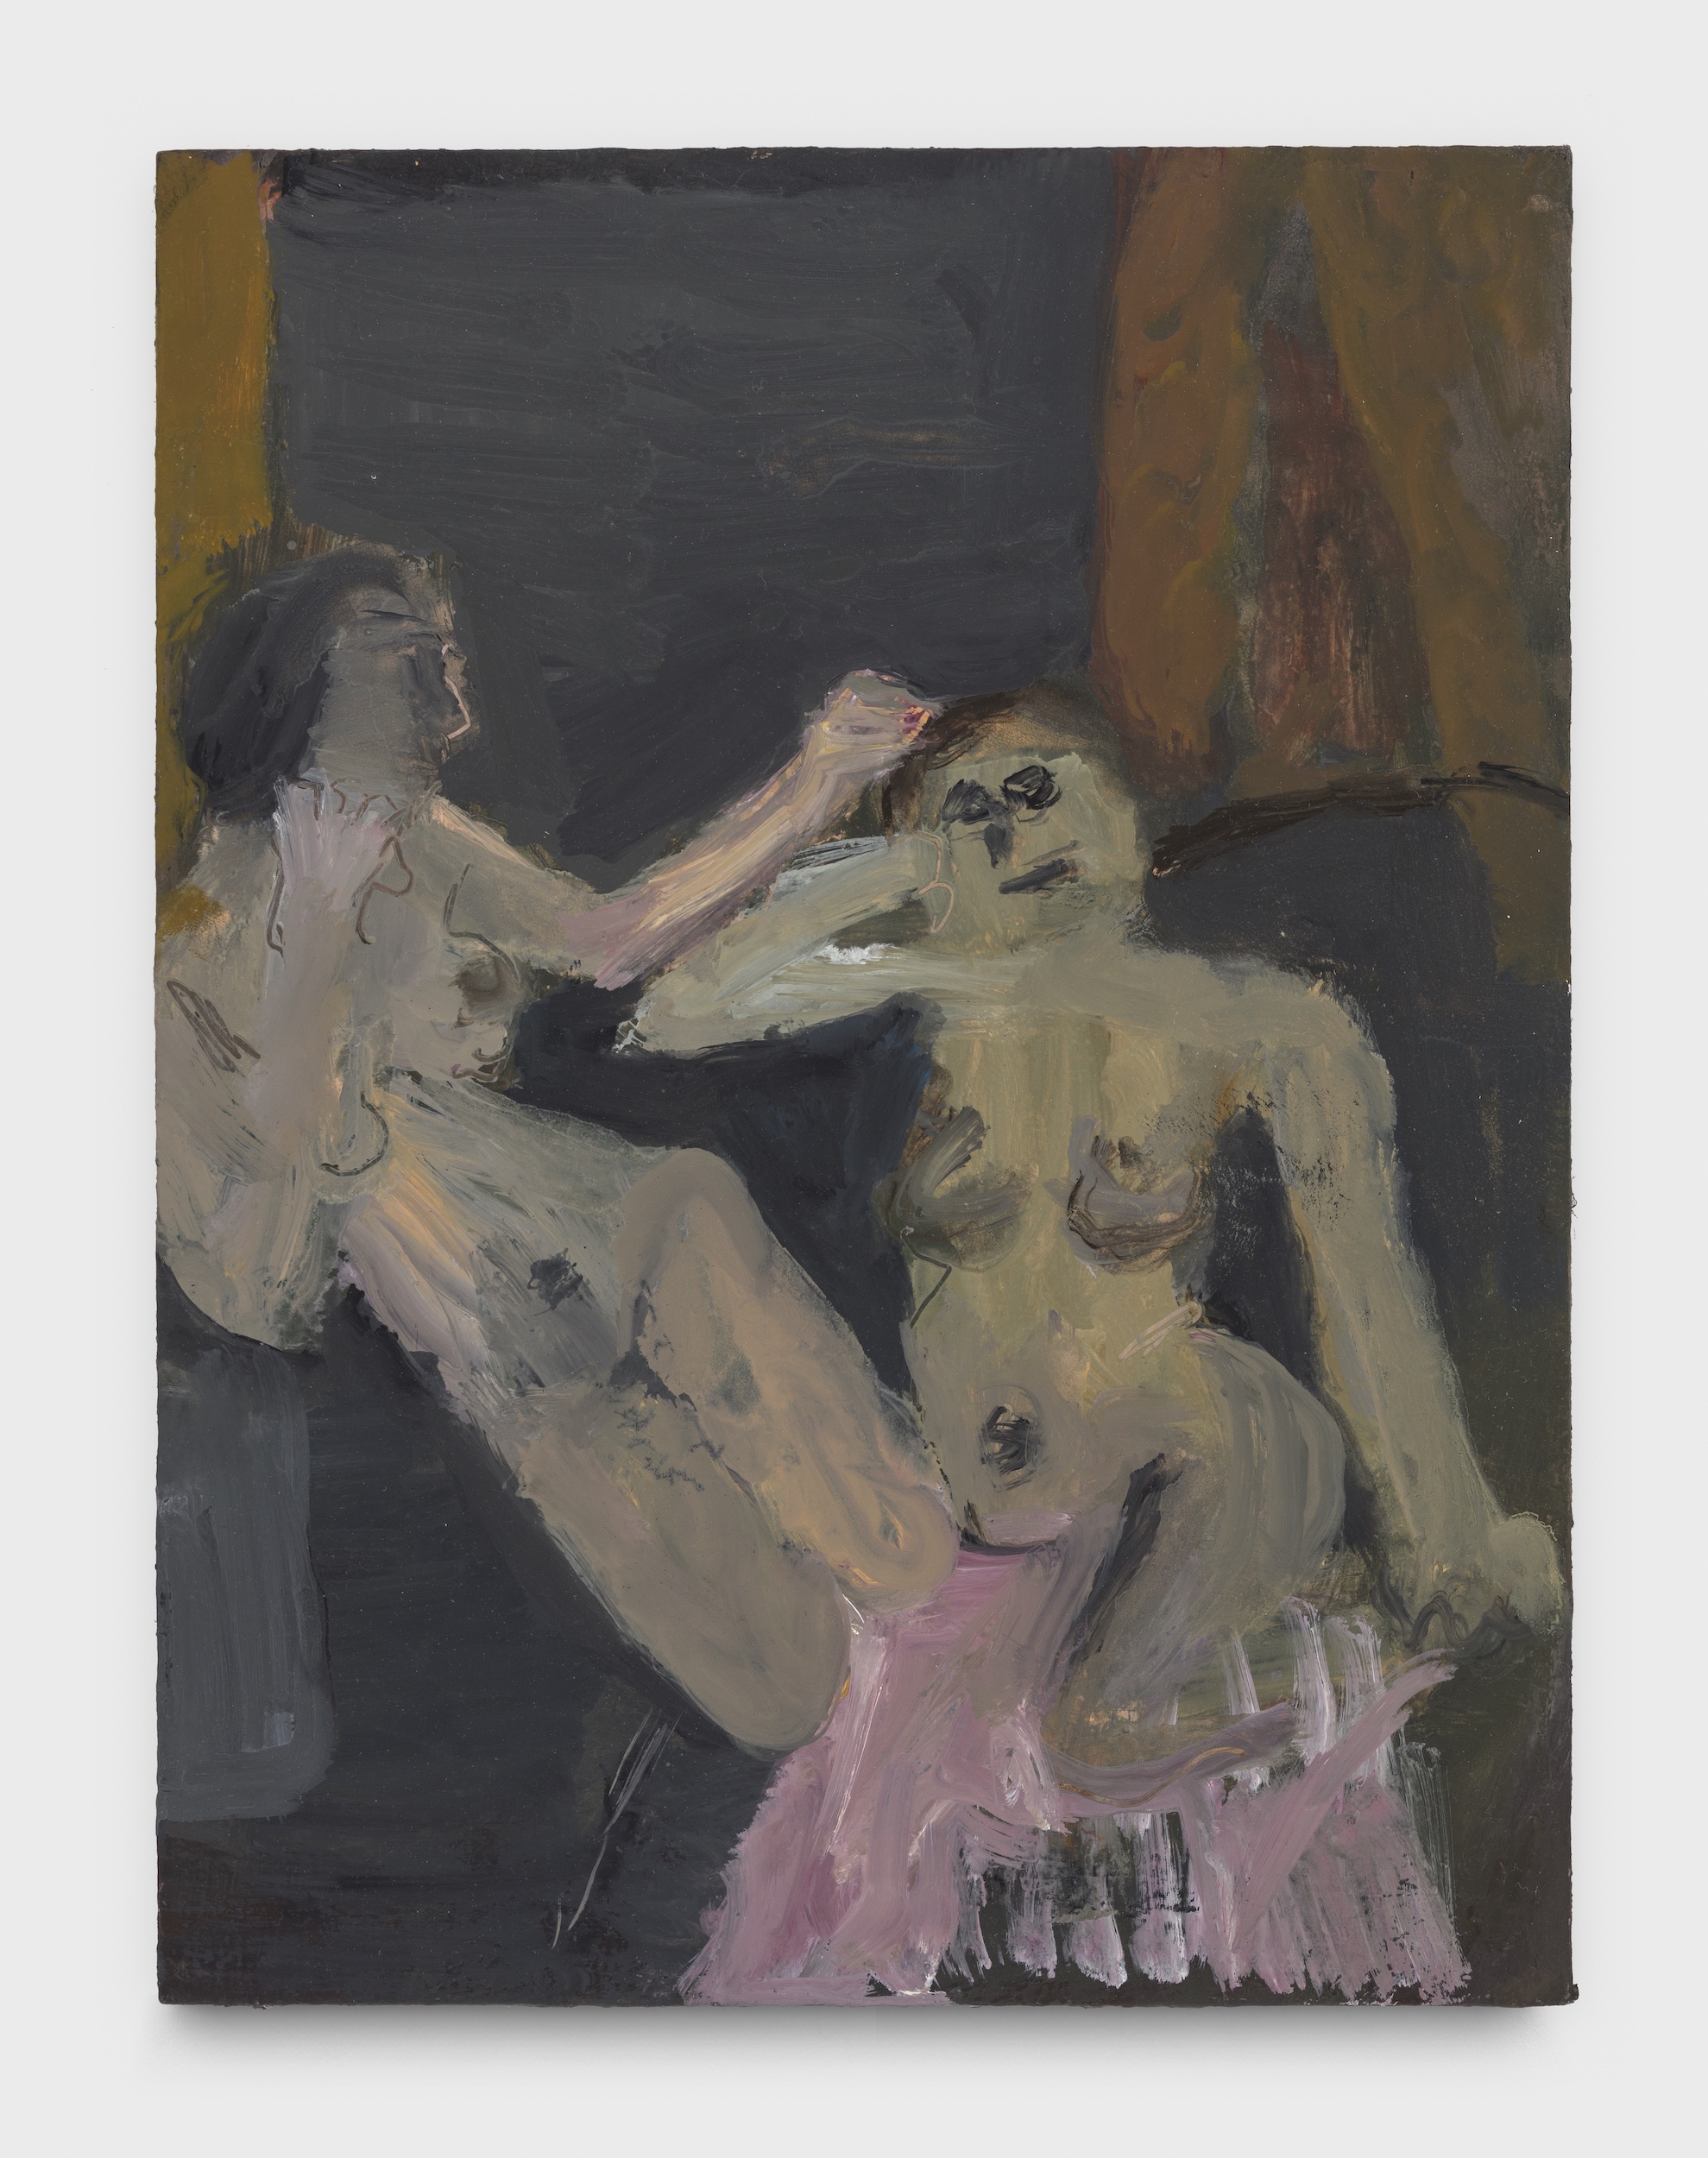 Janice Nowinski - <i>Two Women on a Couch</i>, 2021. Oil on board, 12 x 9 in.